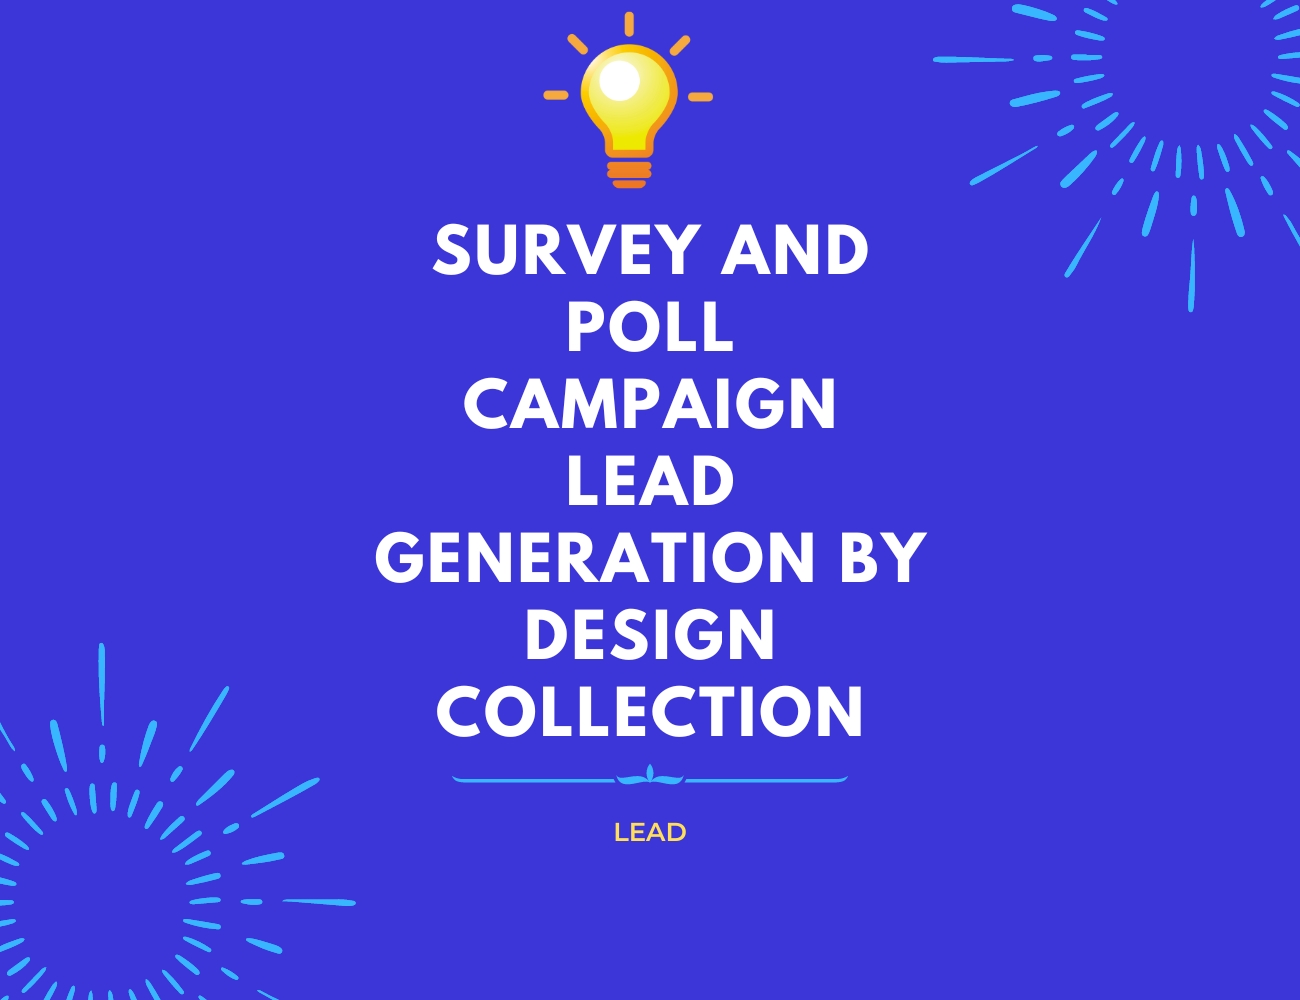 Survey and Poll Campaign Lead Generation by Design Collection